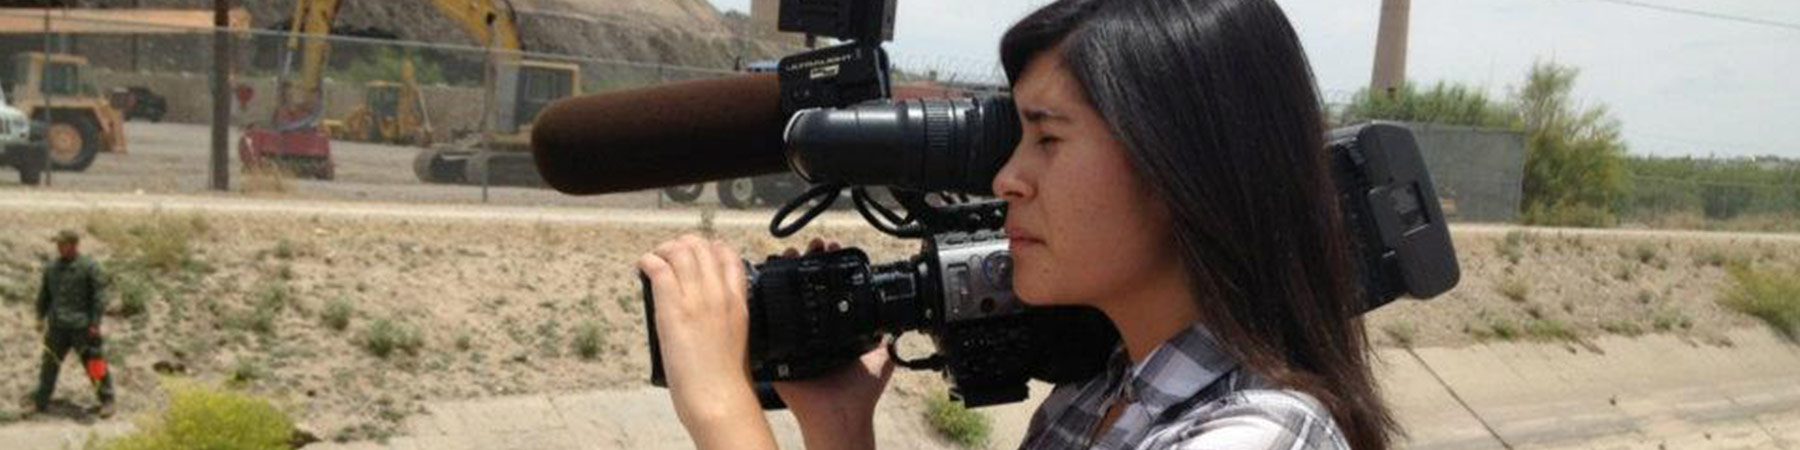 camerawoman holding a video camera on her shoulder while looking thru the lens